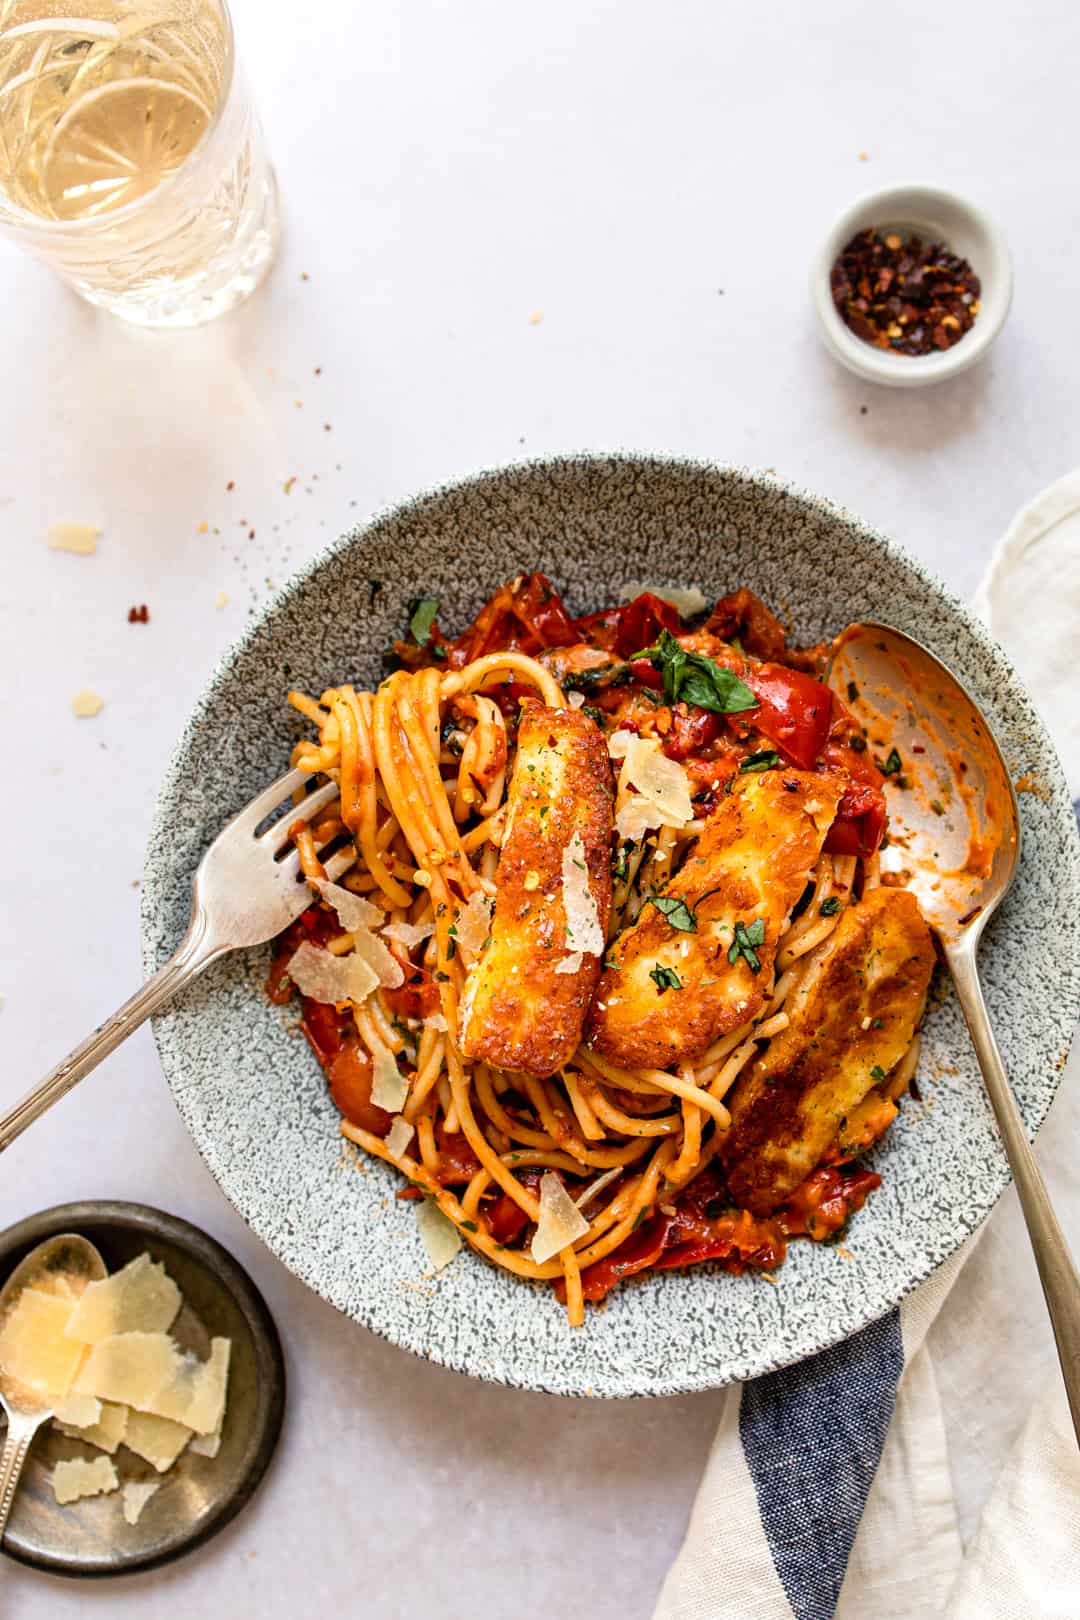 Halloumi pasta in a bowl with parmesan cheese.